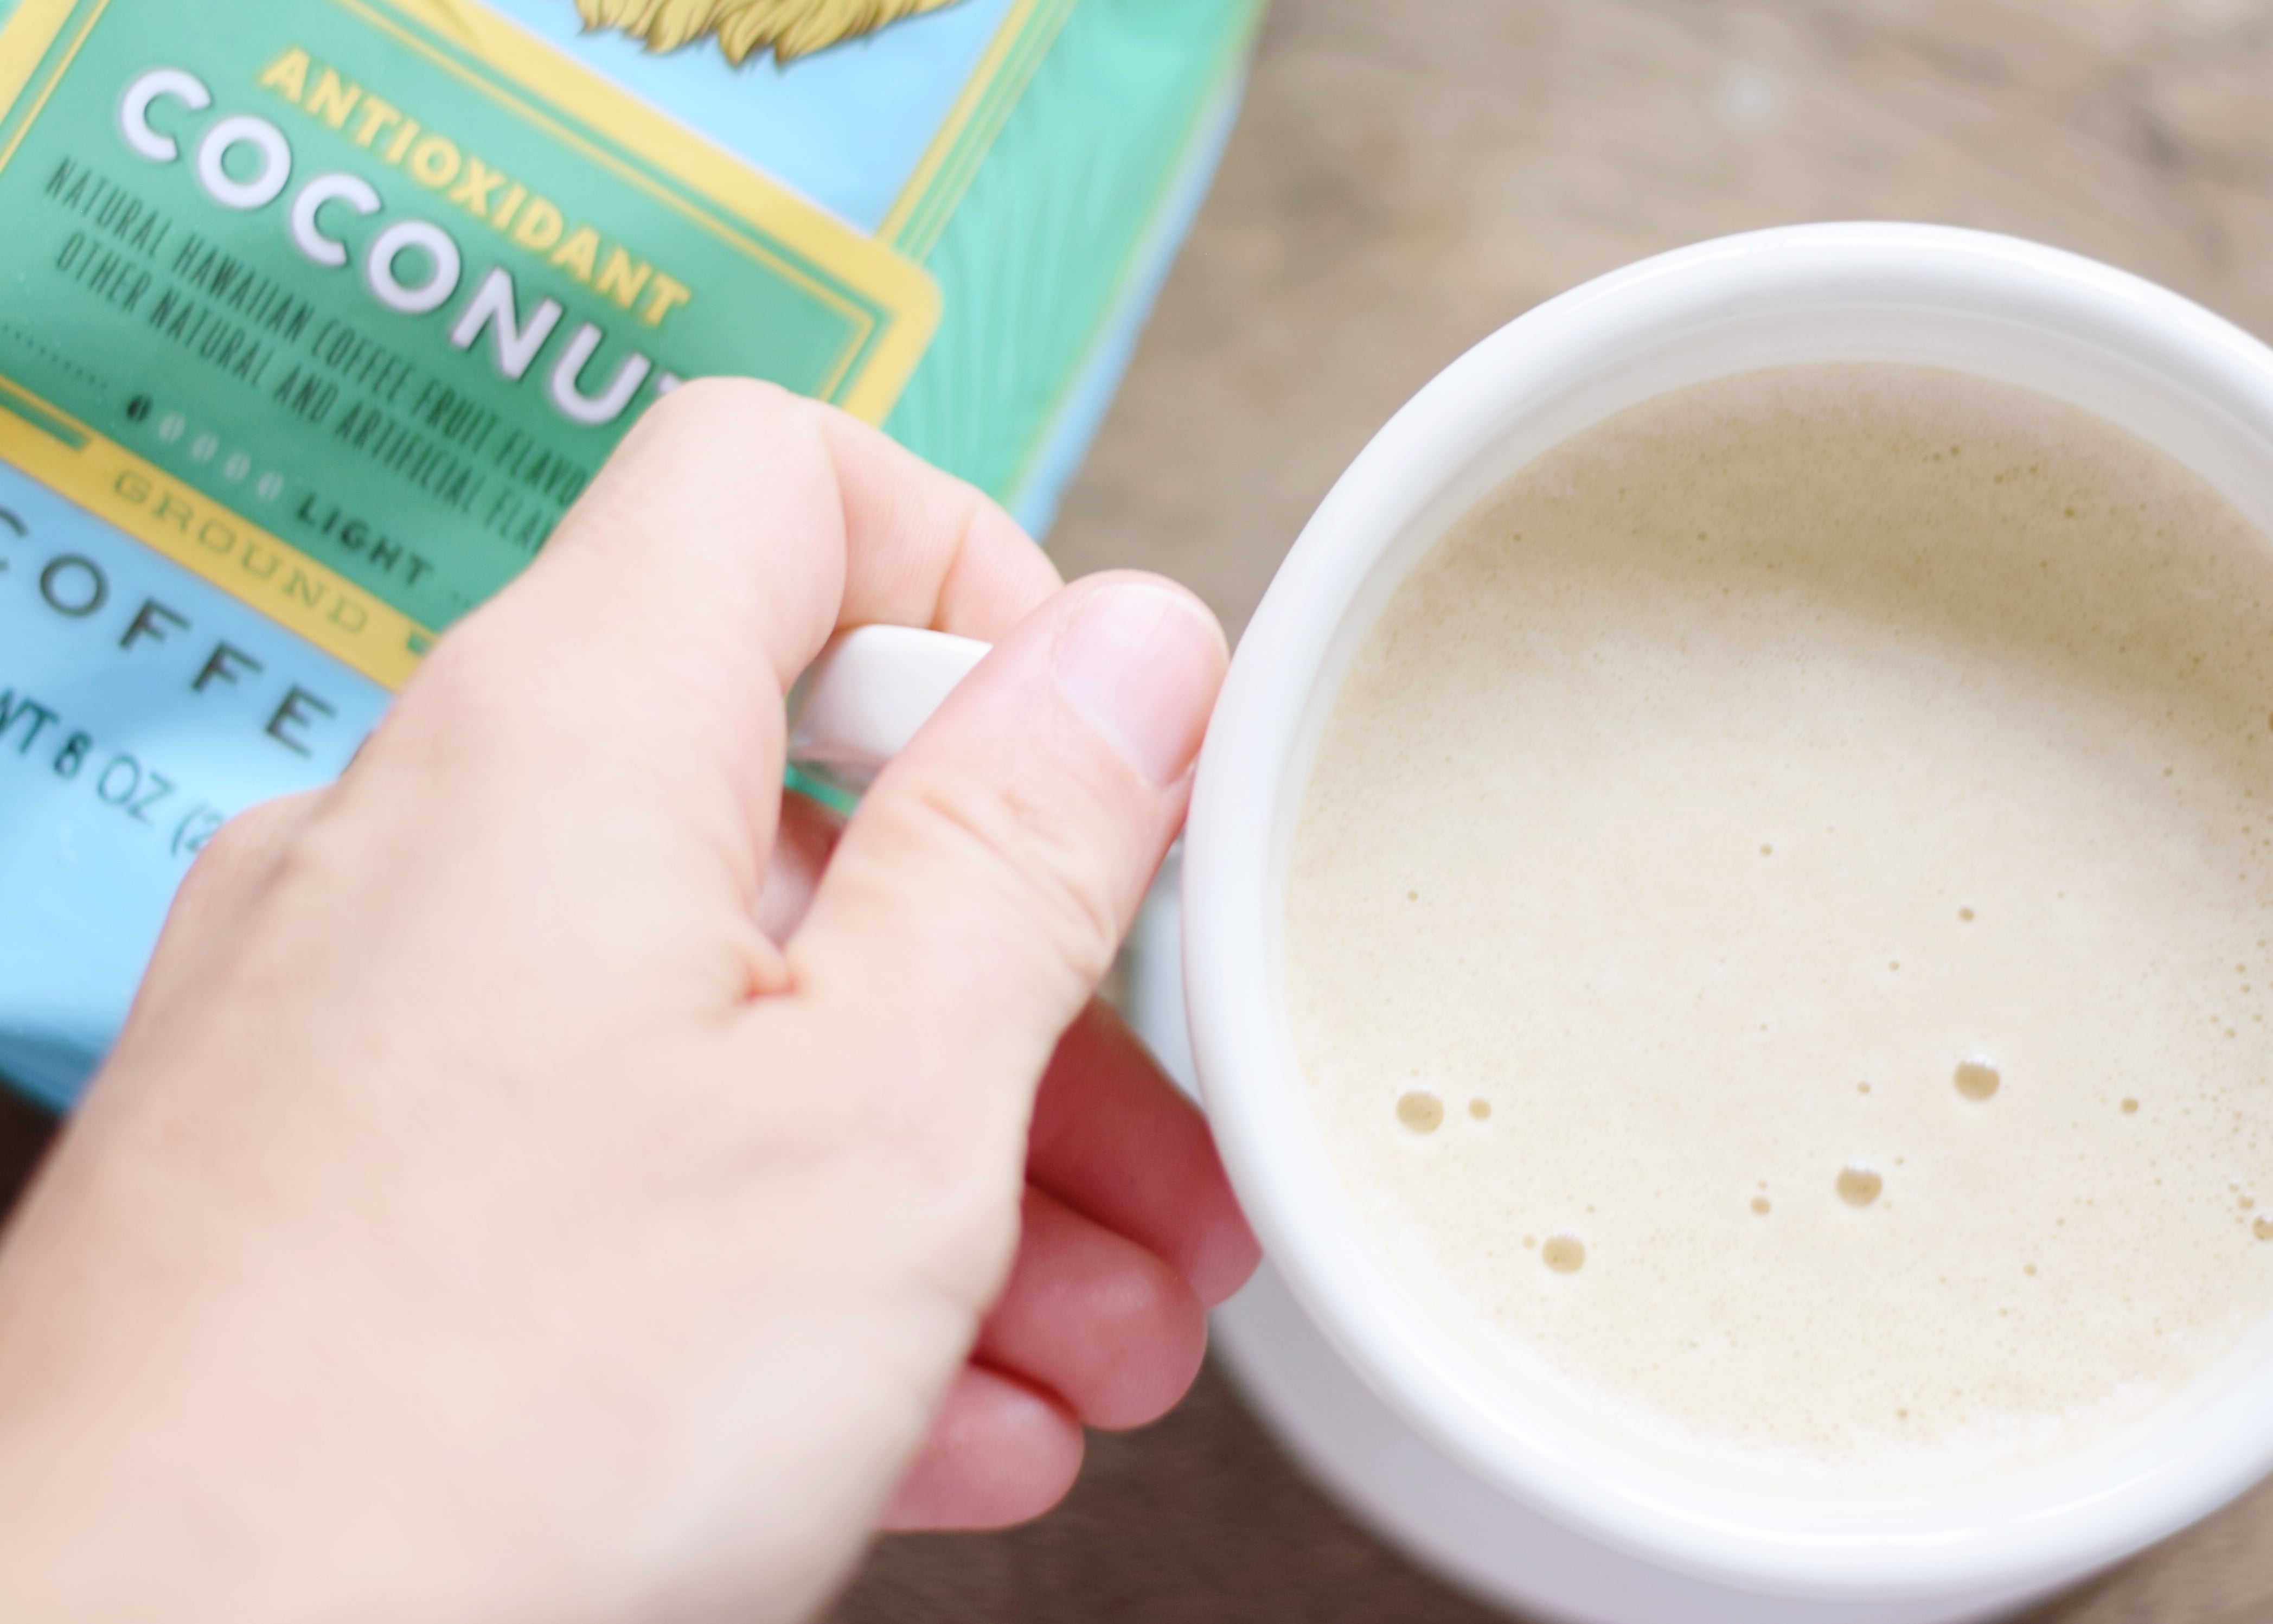 COCONUT BULLETPROOF COFFEE - A delicious recipe for coconut bulletproof coffee that is perfect for summer and packed with energy! | Coconut Coffee - Lion Coffee Hawaii - Easy Bulletproof Coffee Recipe - Bulletproof Coffee - What Is Bulletproof Coffee - Dairy Free Bulletproof Coffee - How To Make Bulletproof Coffee - #bulletproofcoffee #coconutcoffee